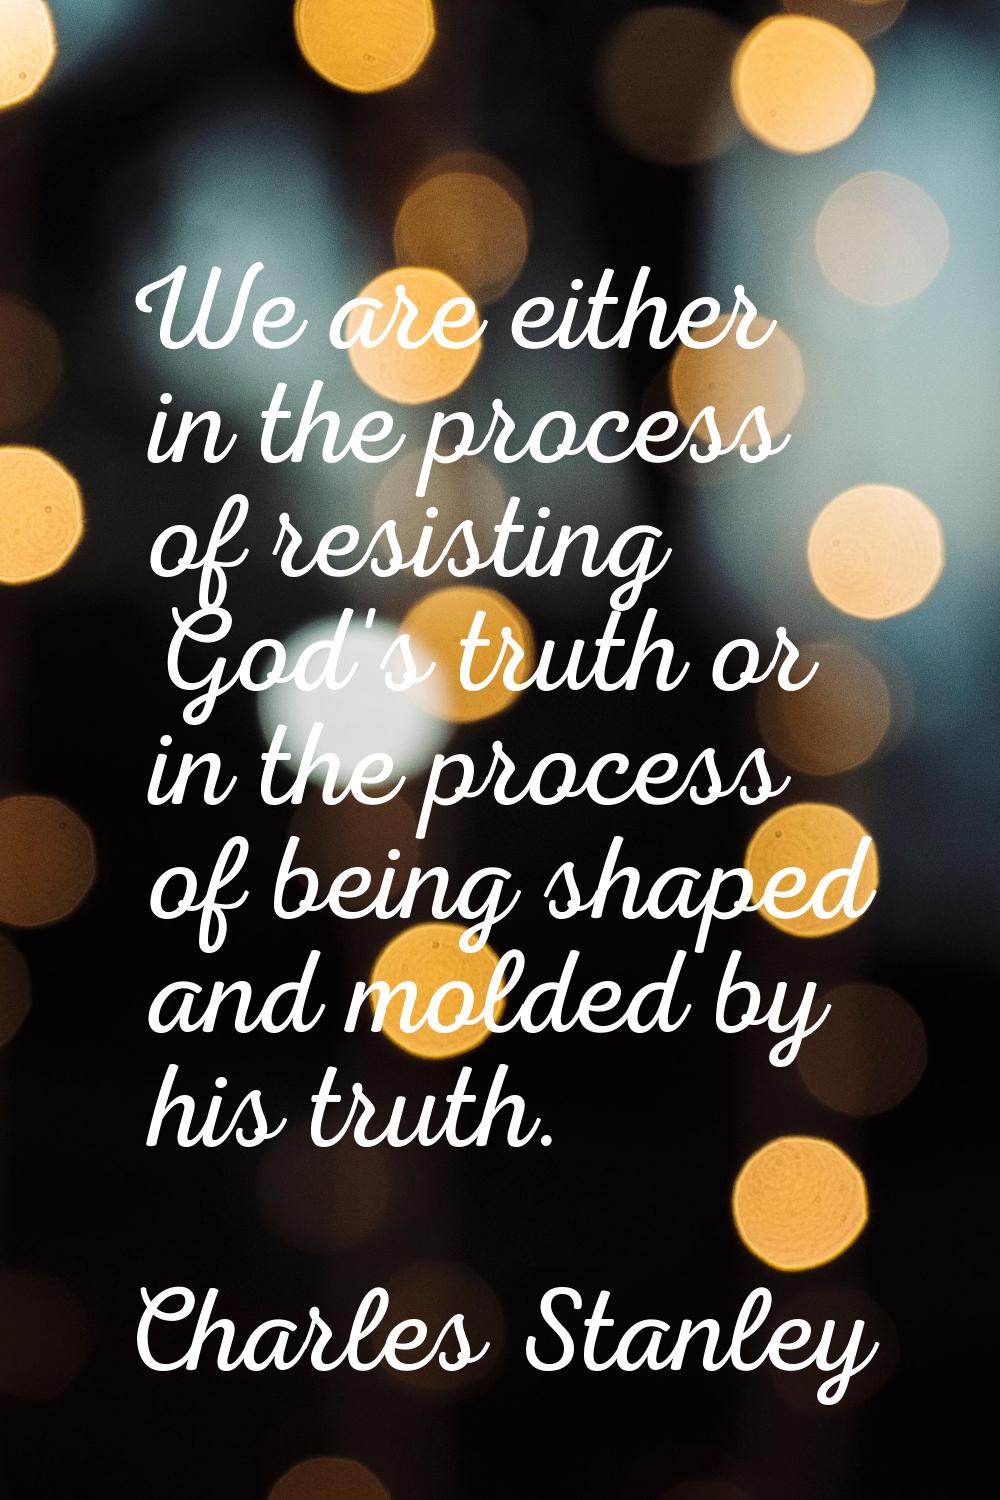 We are either in the process of resisting God's truth or in the process of being shaped and molded 